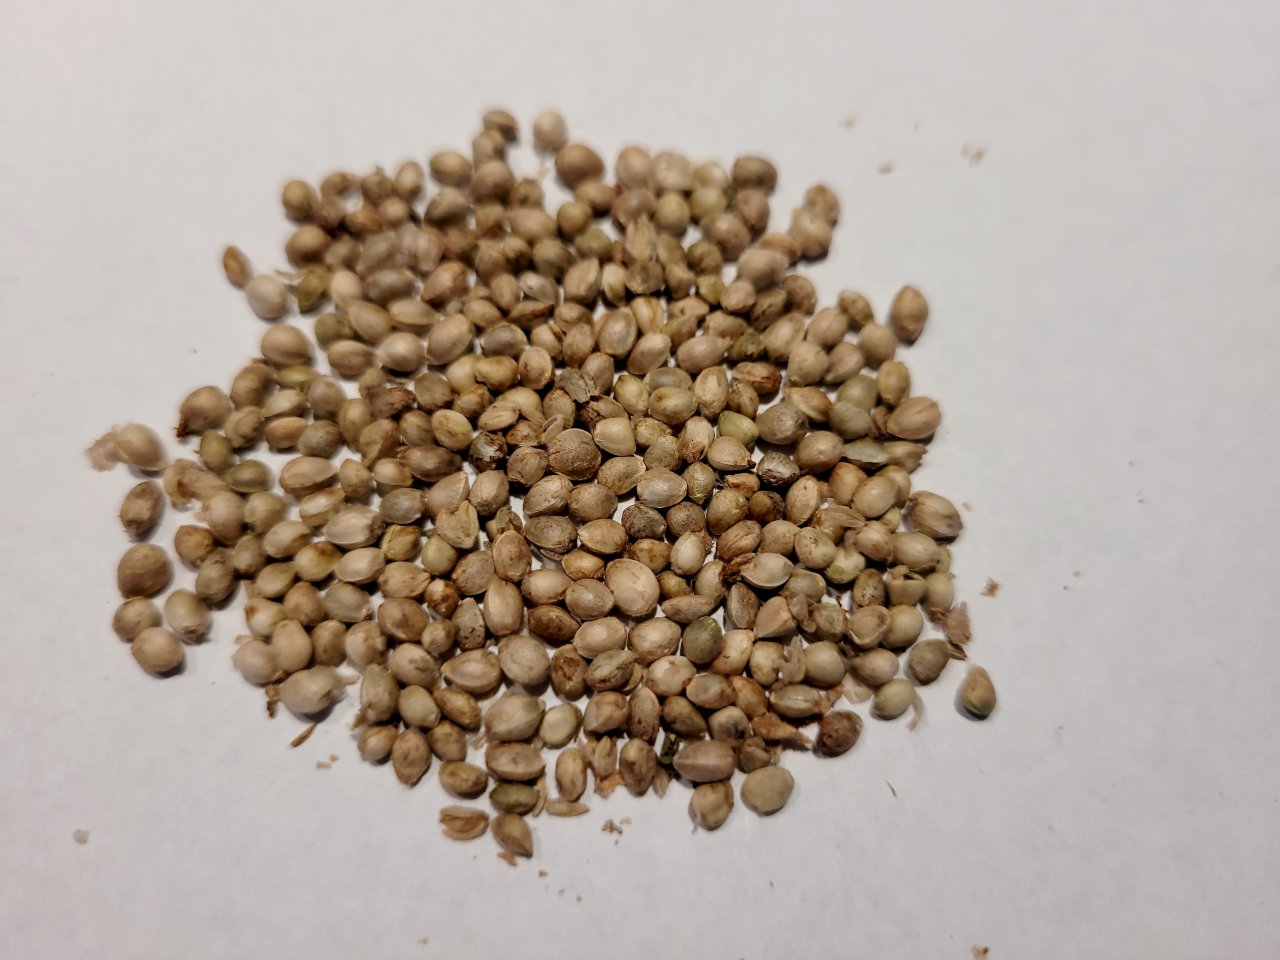 20220624_181839  Sour G STS pale seeds.jpg